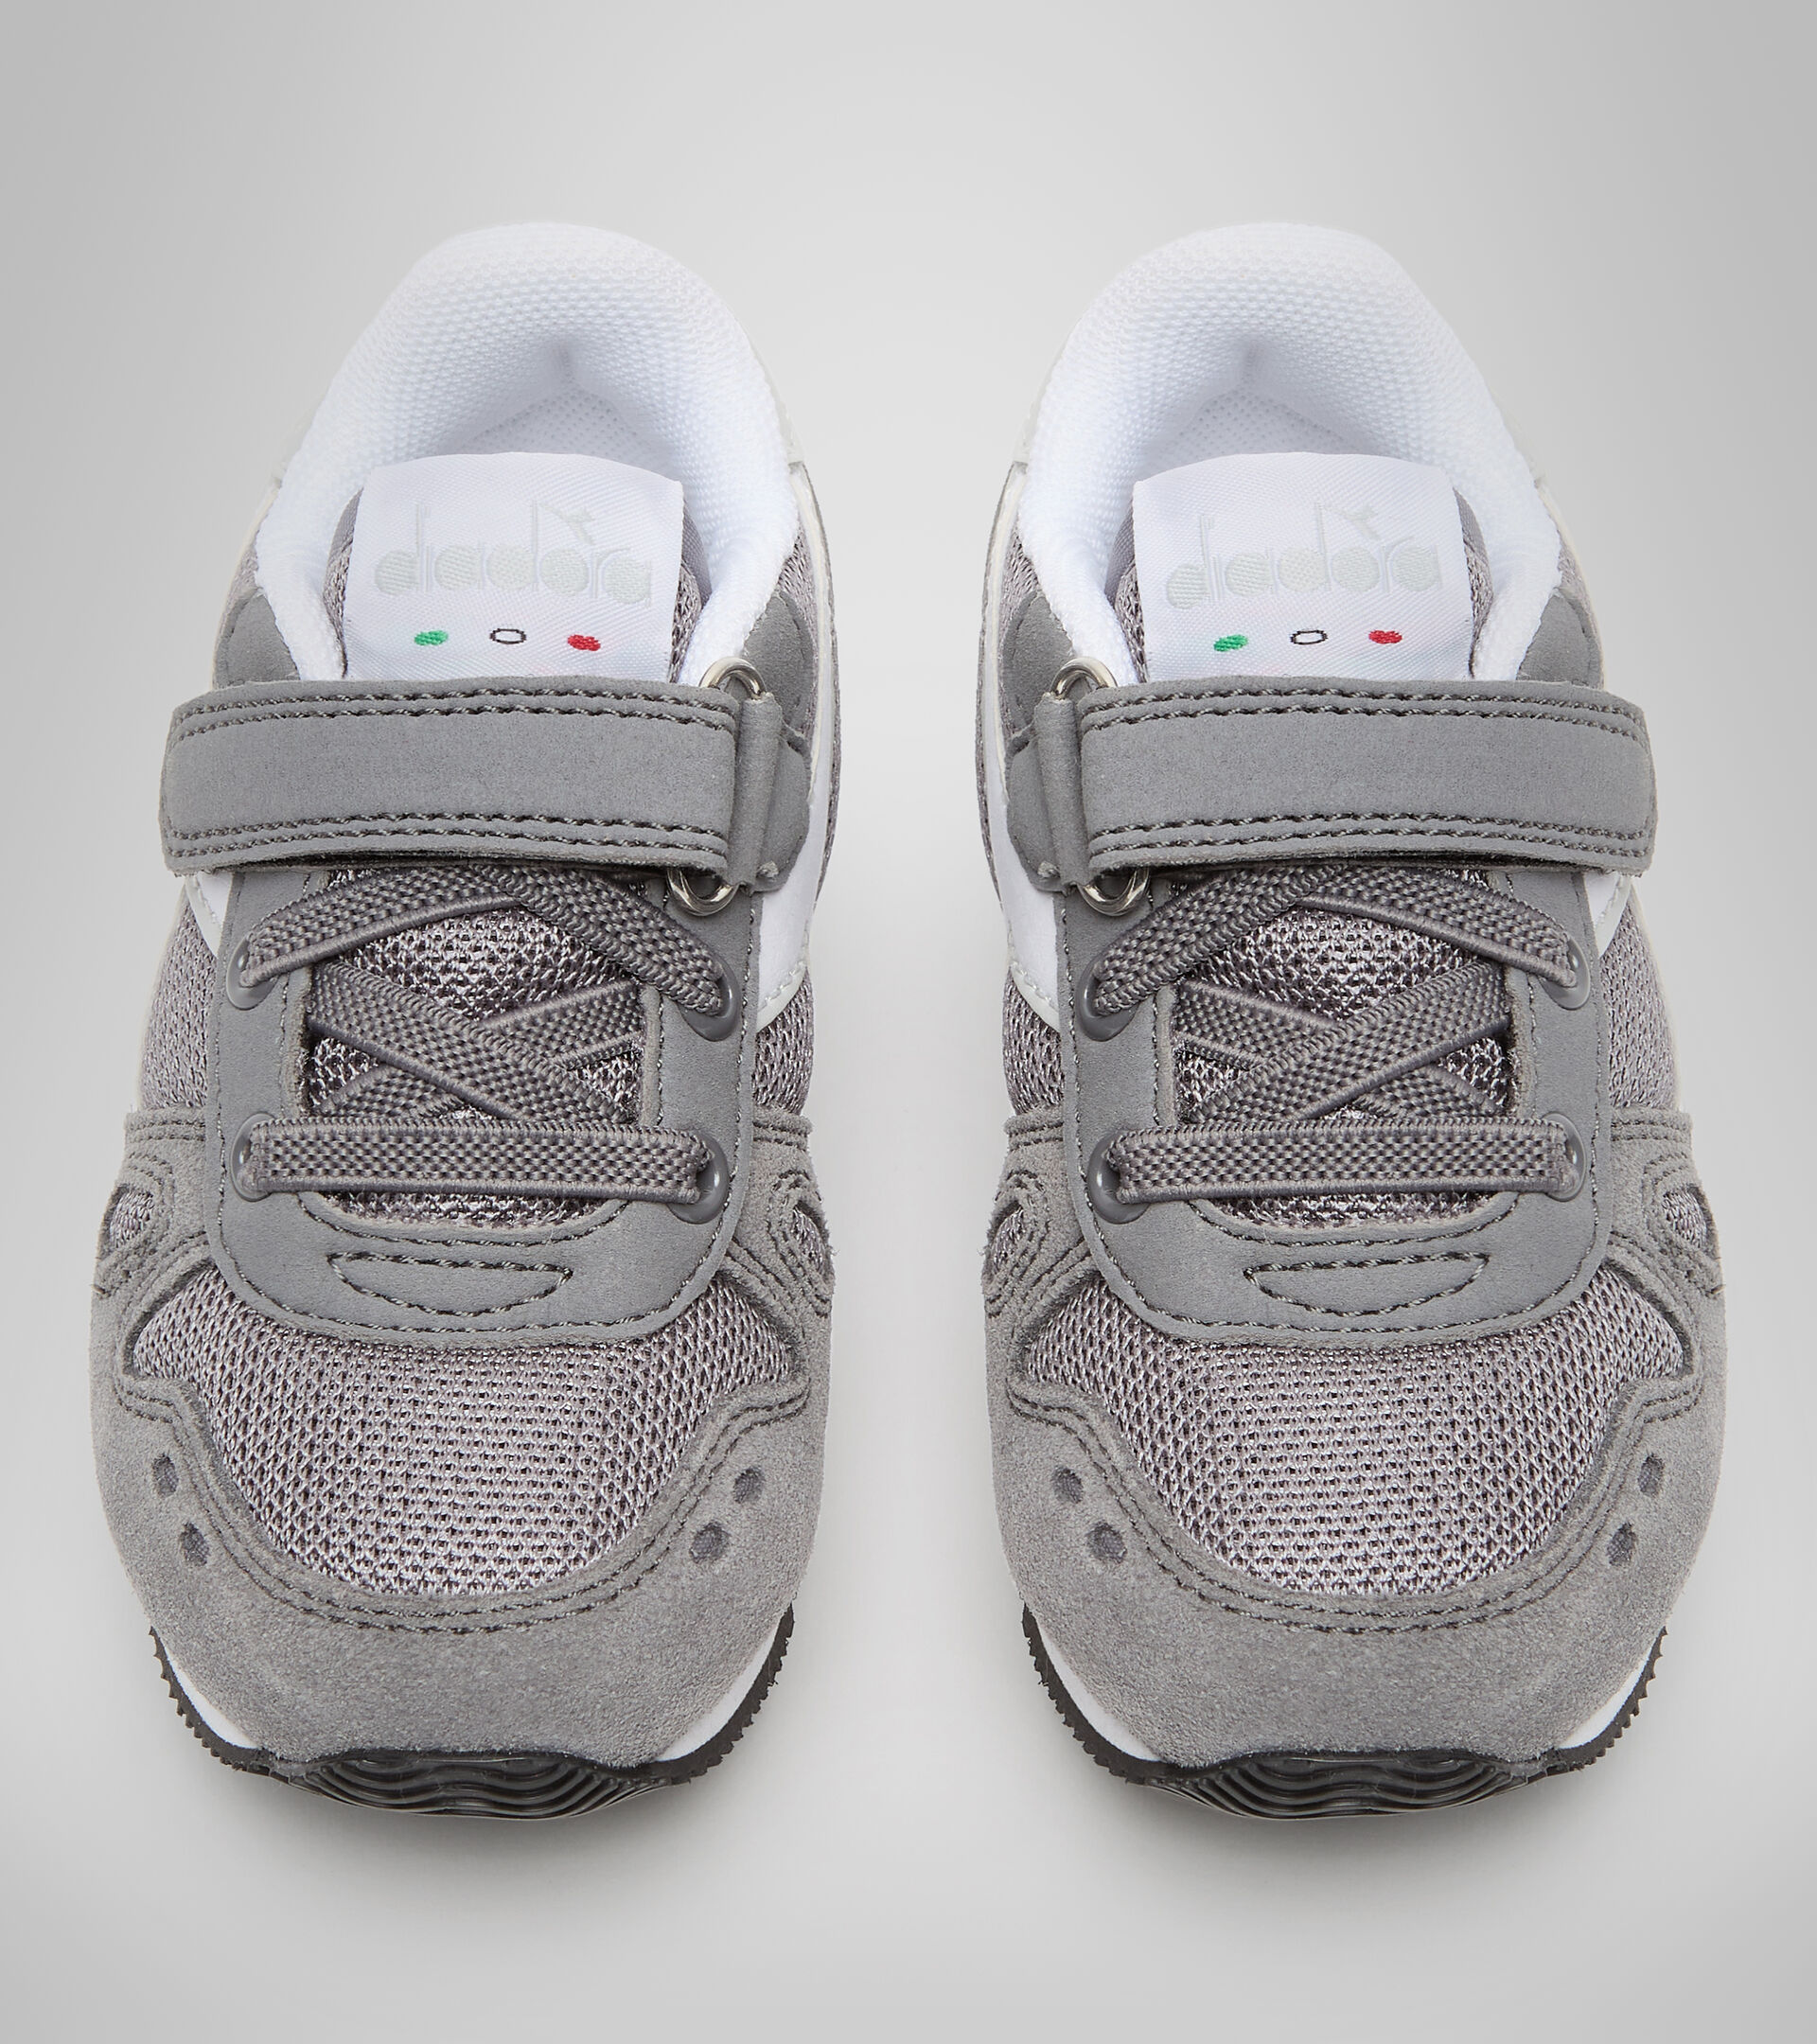 Sports shoes - Toddlers 1-4 years SIMPLE RUN TD STEEL GRAY - Diadora